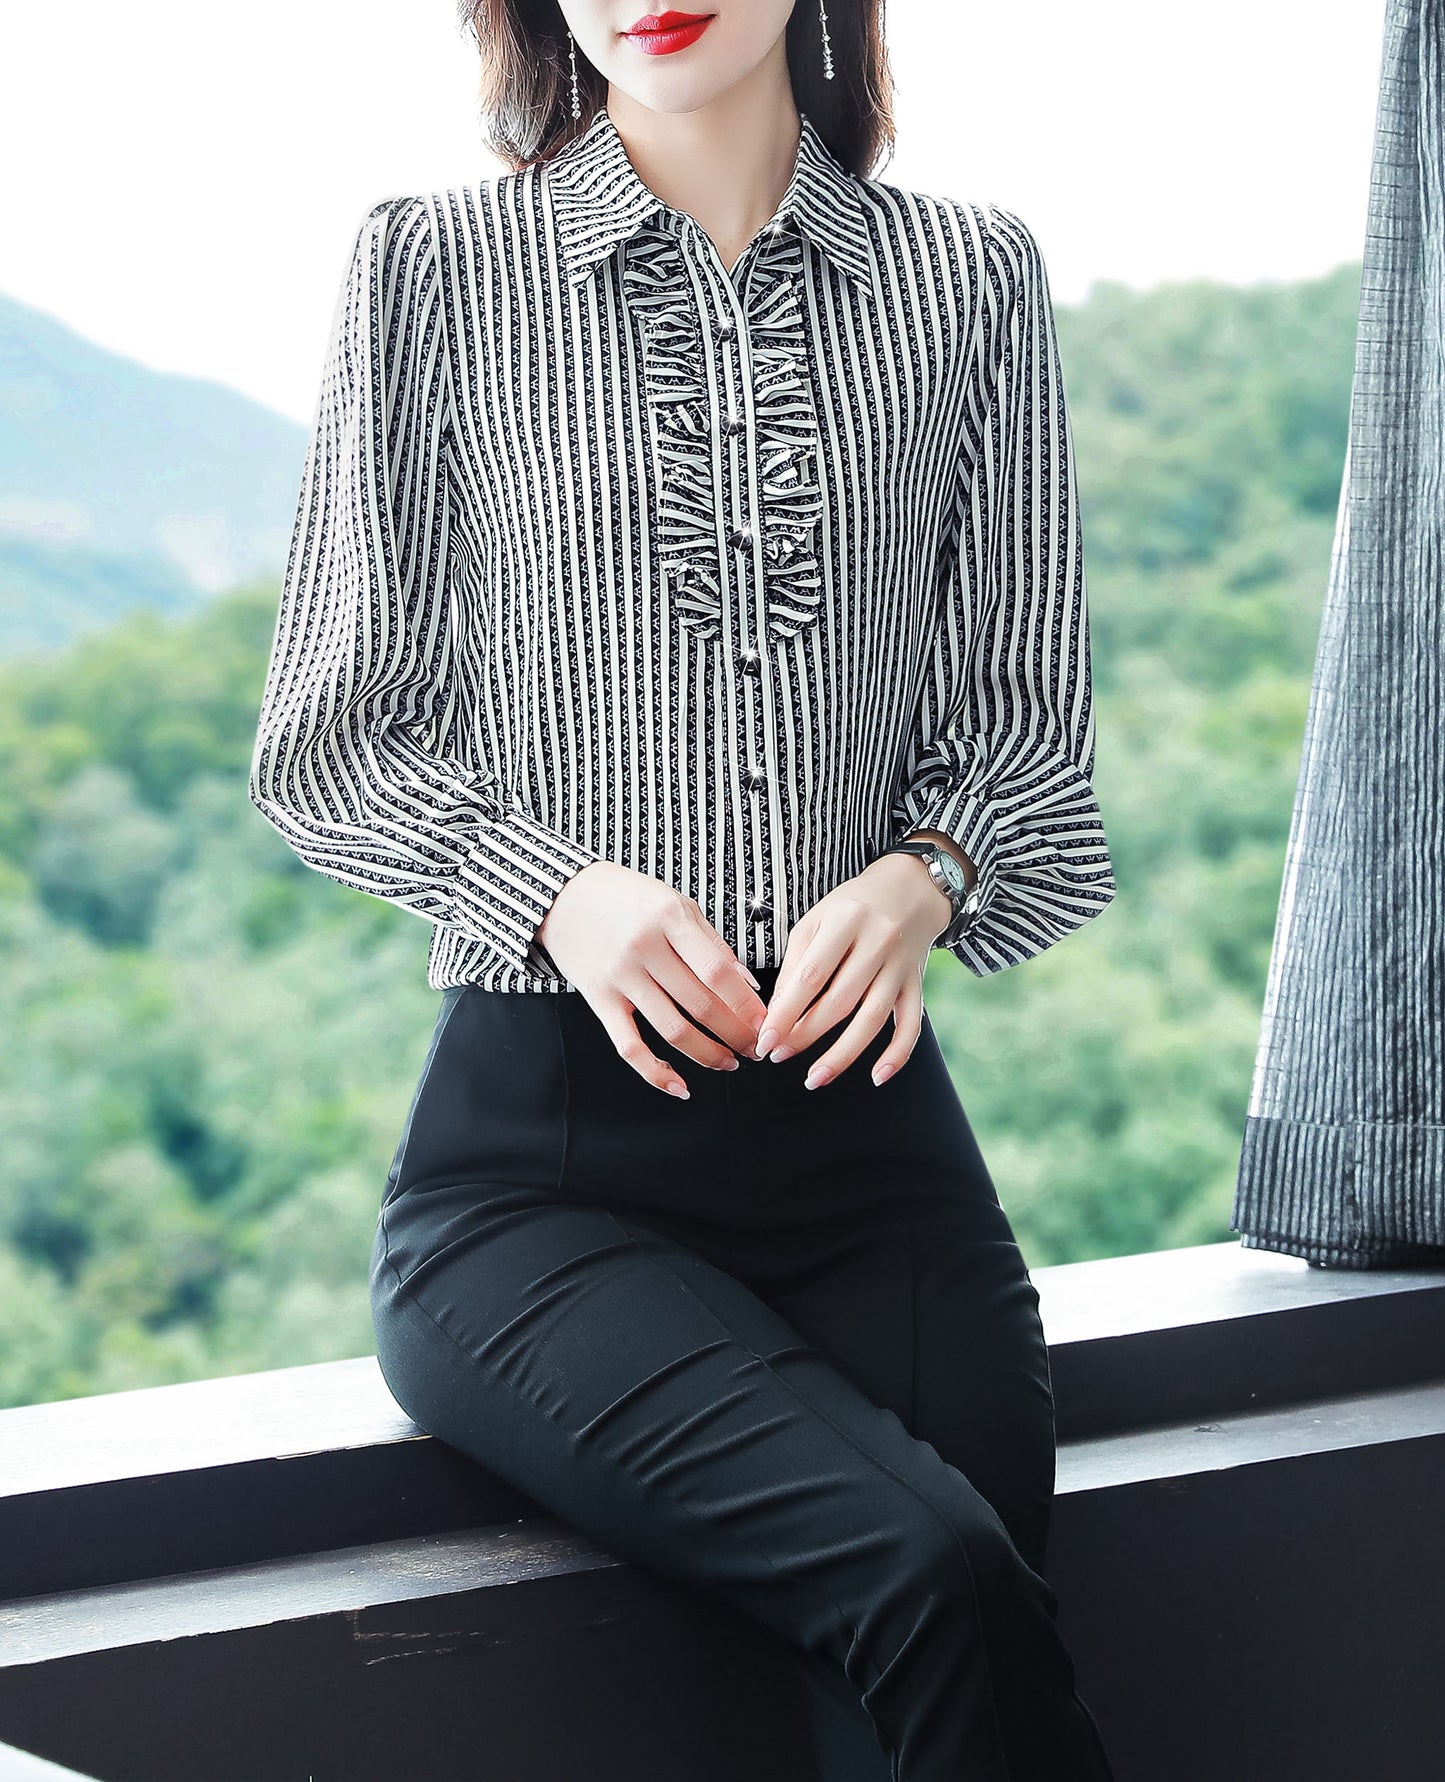 Black Stripe Tops Collared Neck Long Sleeves Button Up Print Blouse